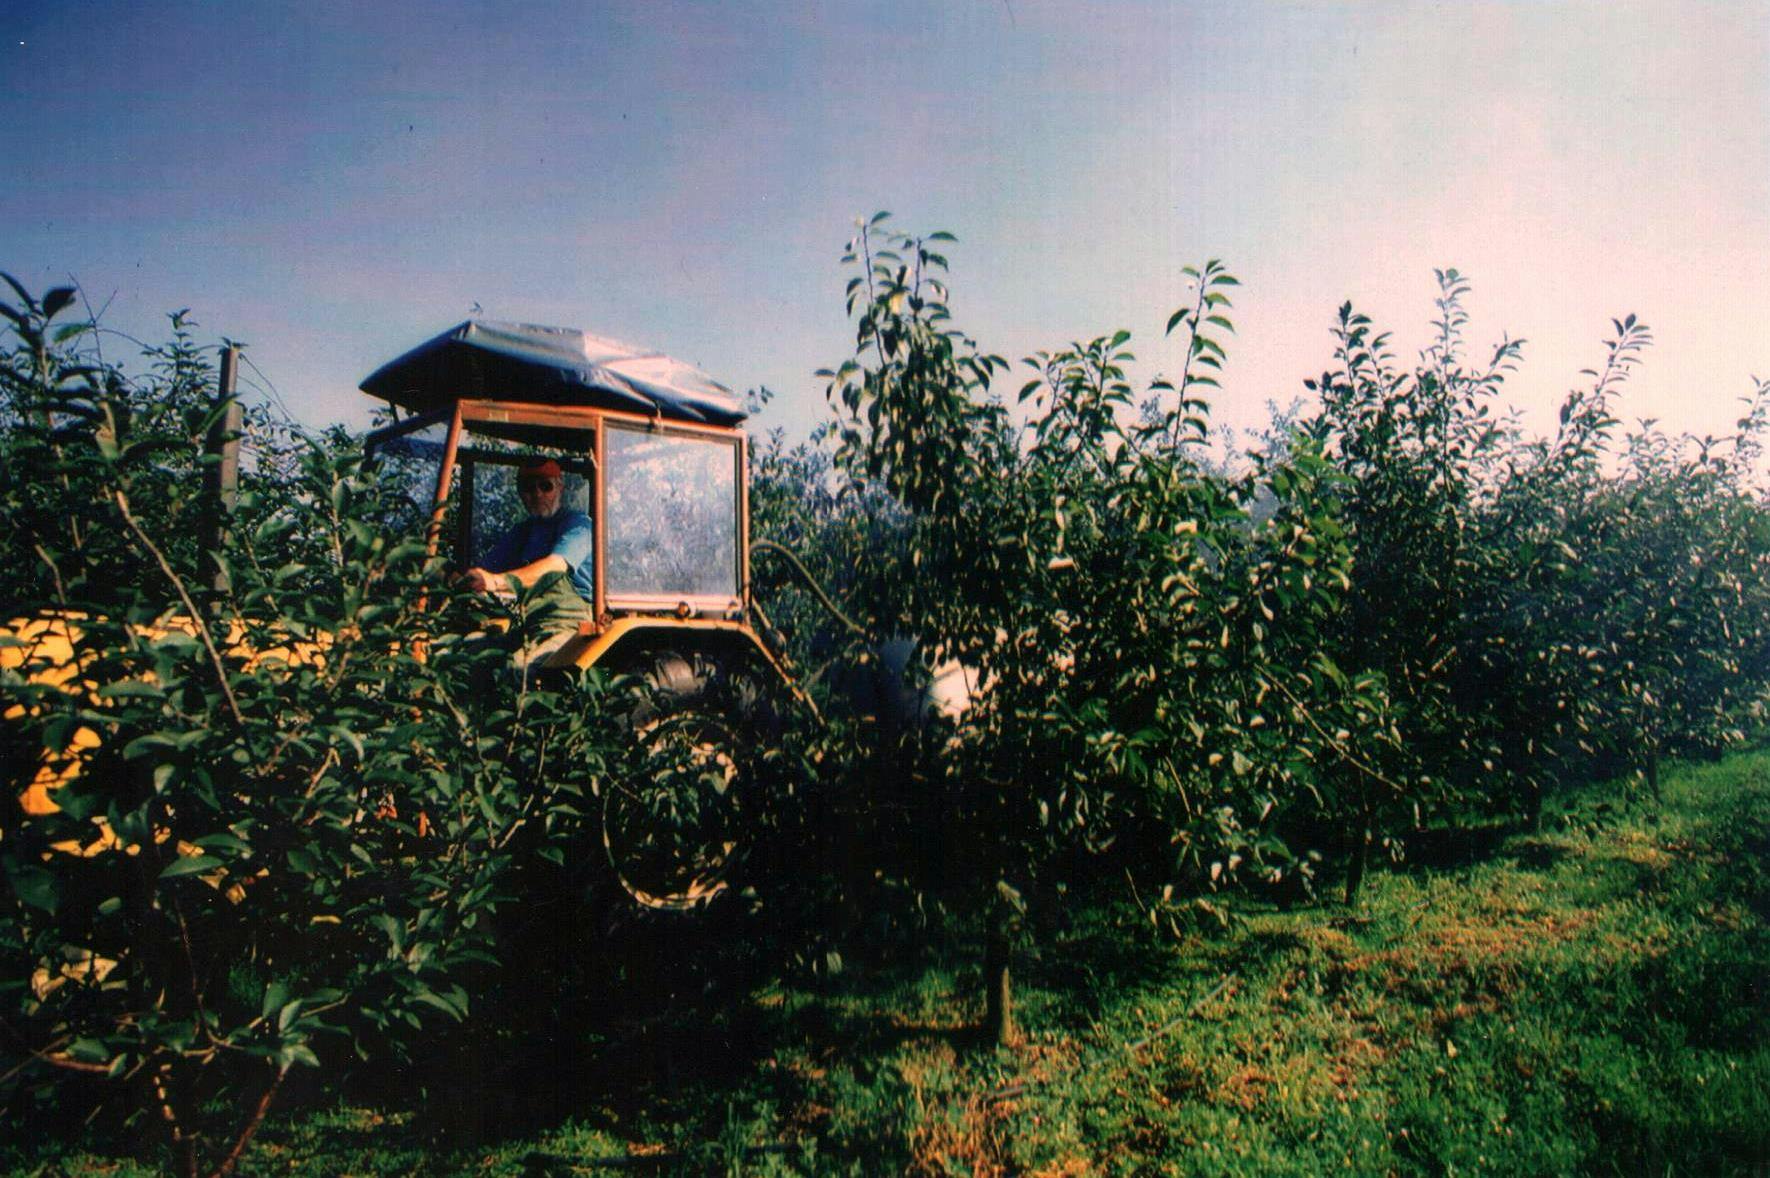 Orchard and airport owner, Zbigniew Kowalski, personally operating an agricultural tractor during tree spraying.